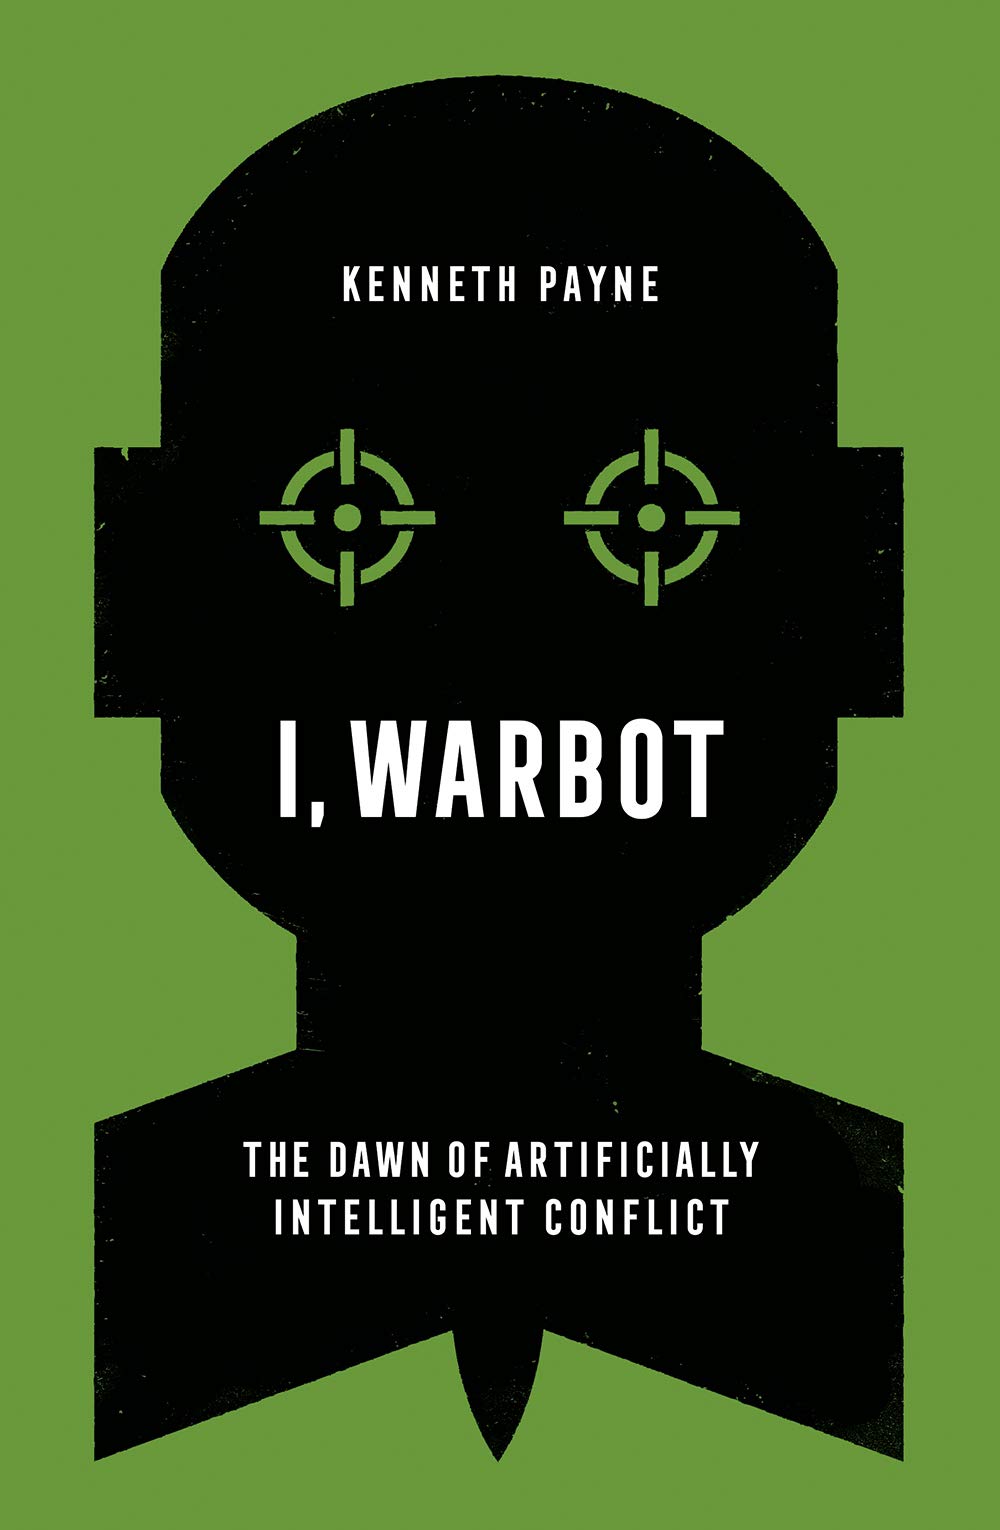 I WARBOT, THE DAWN OF ARTIFICIALLY INTELLIGENT CONFLICT